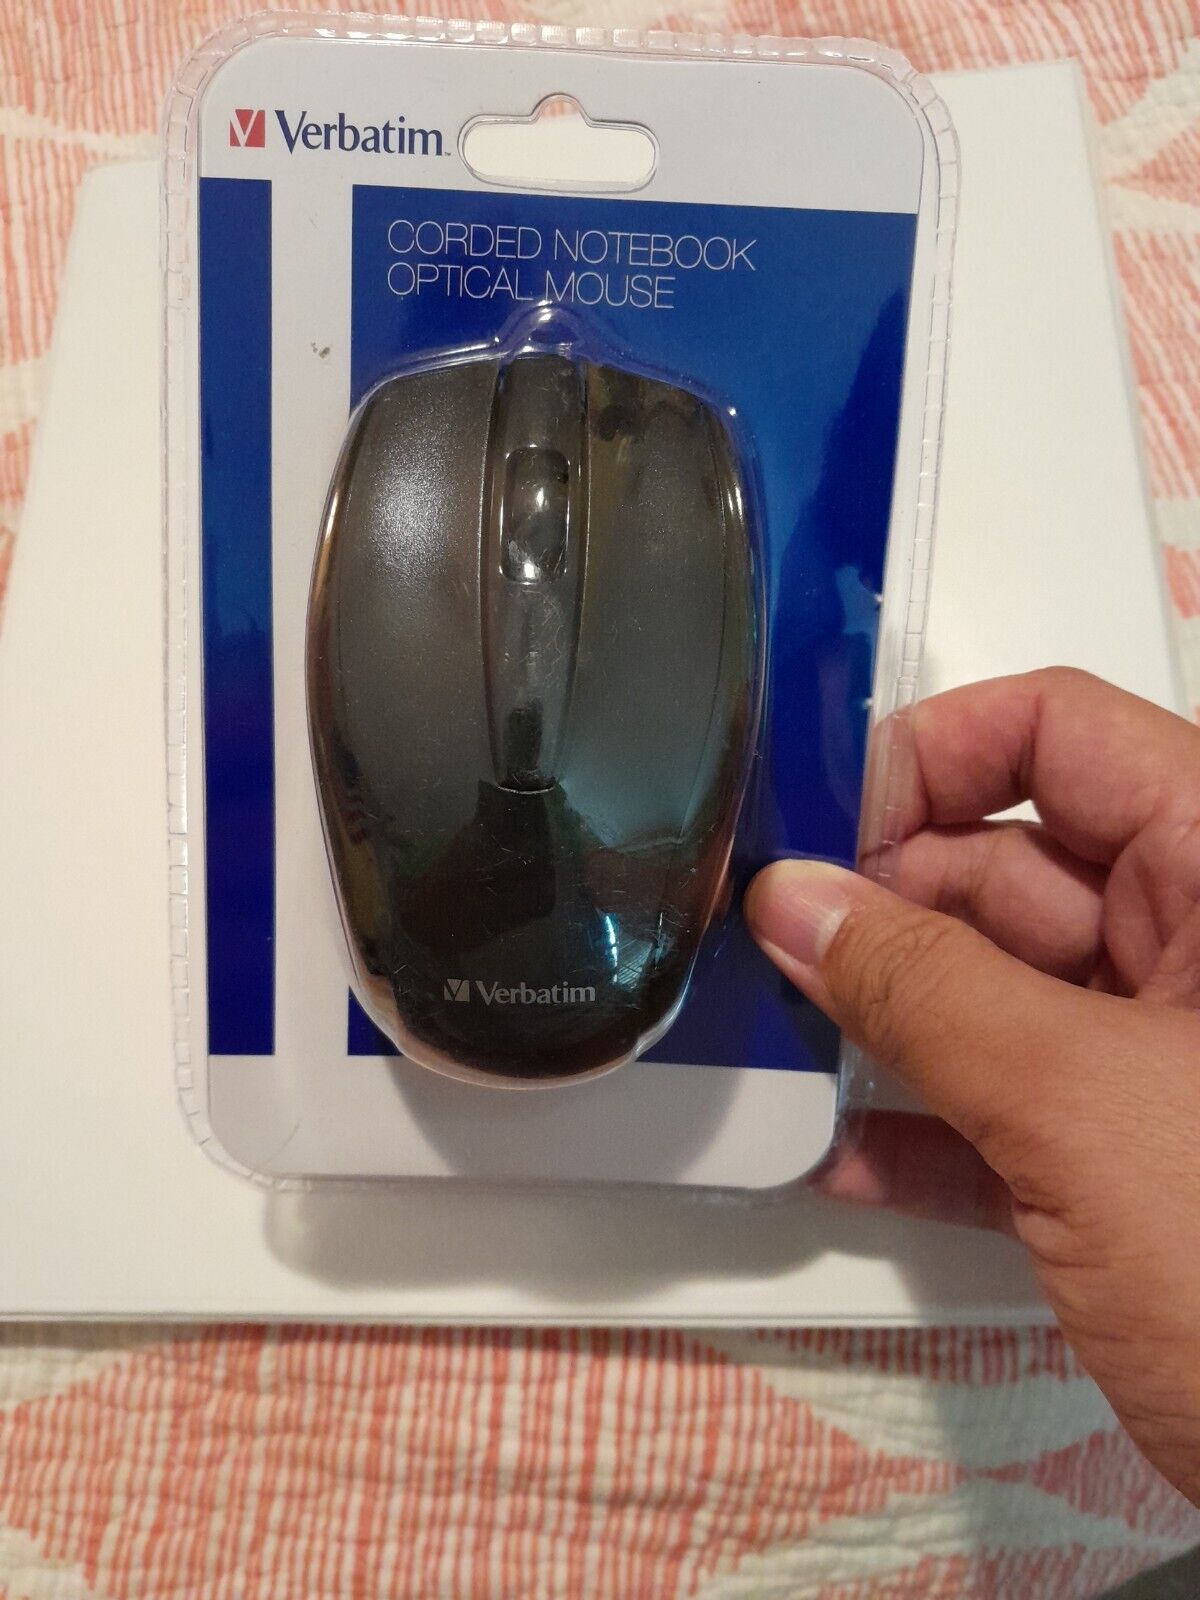 New & sealed Verbatim Corporation 98106 Corded Notebook Optical Mouse Black B12